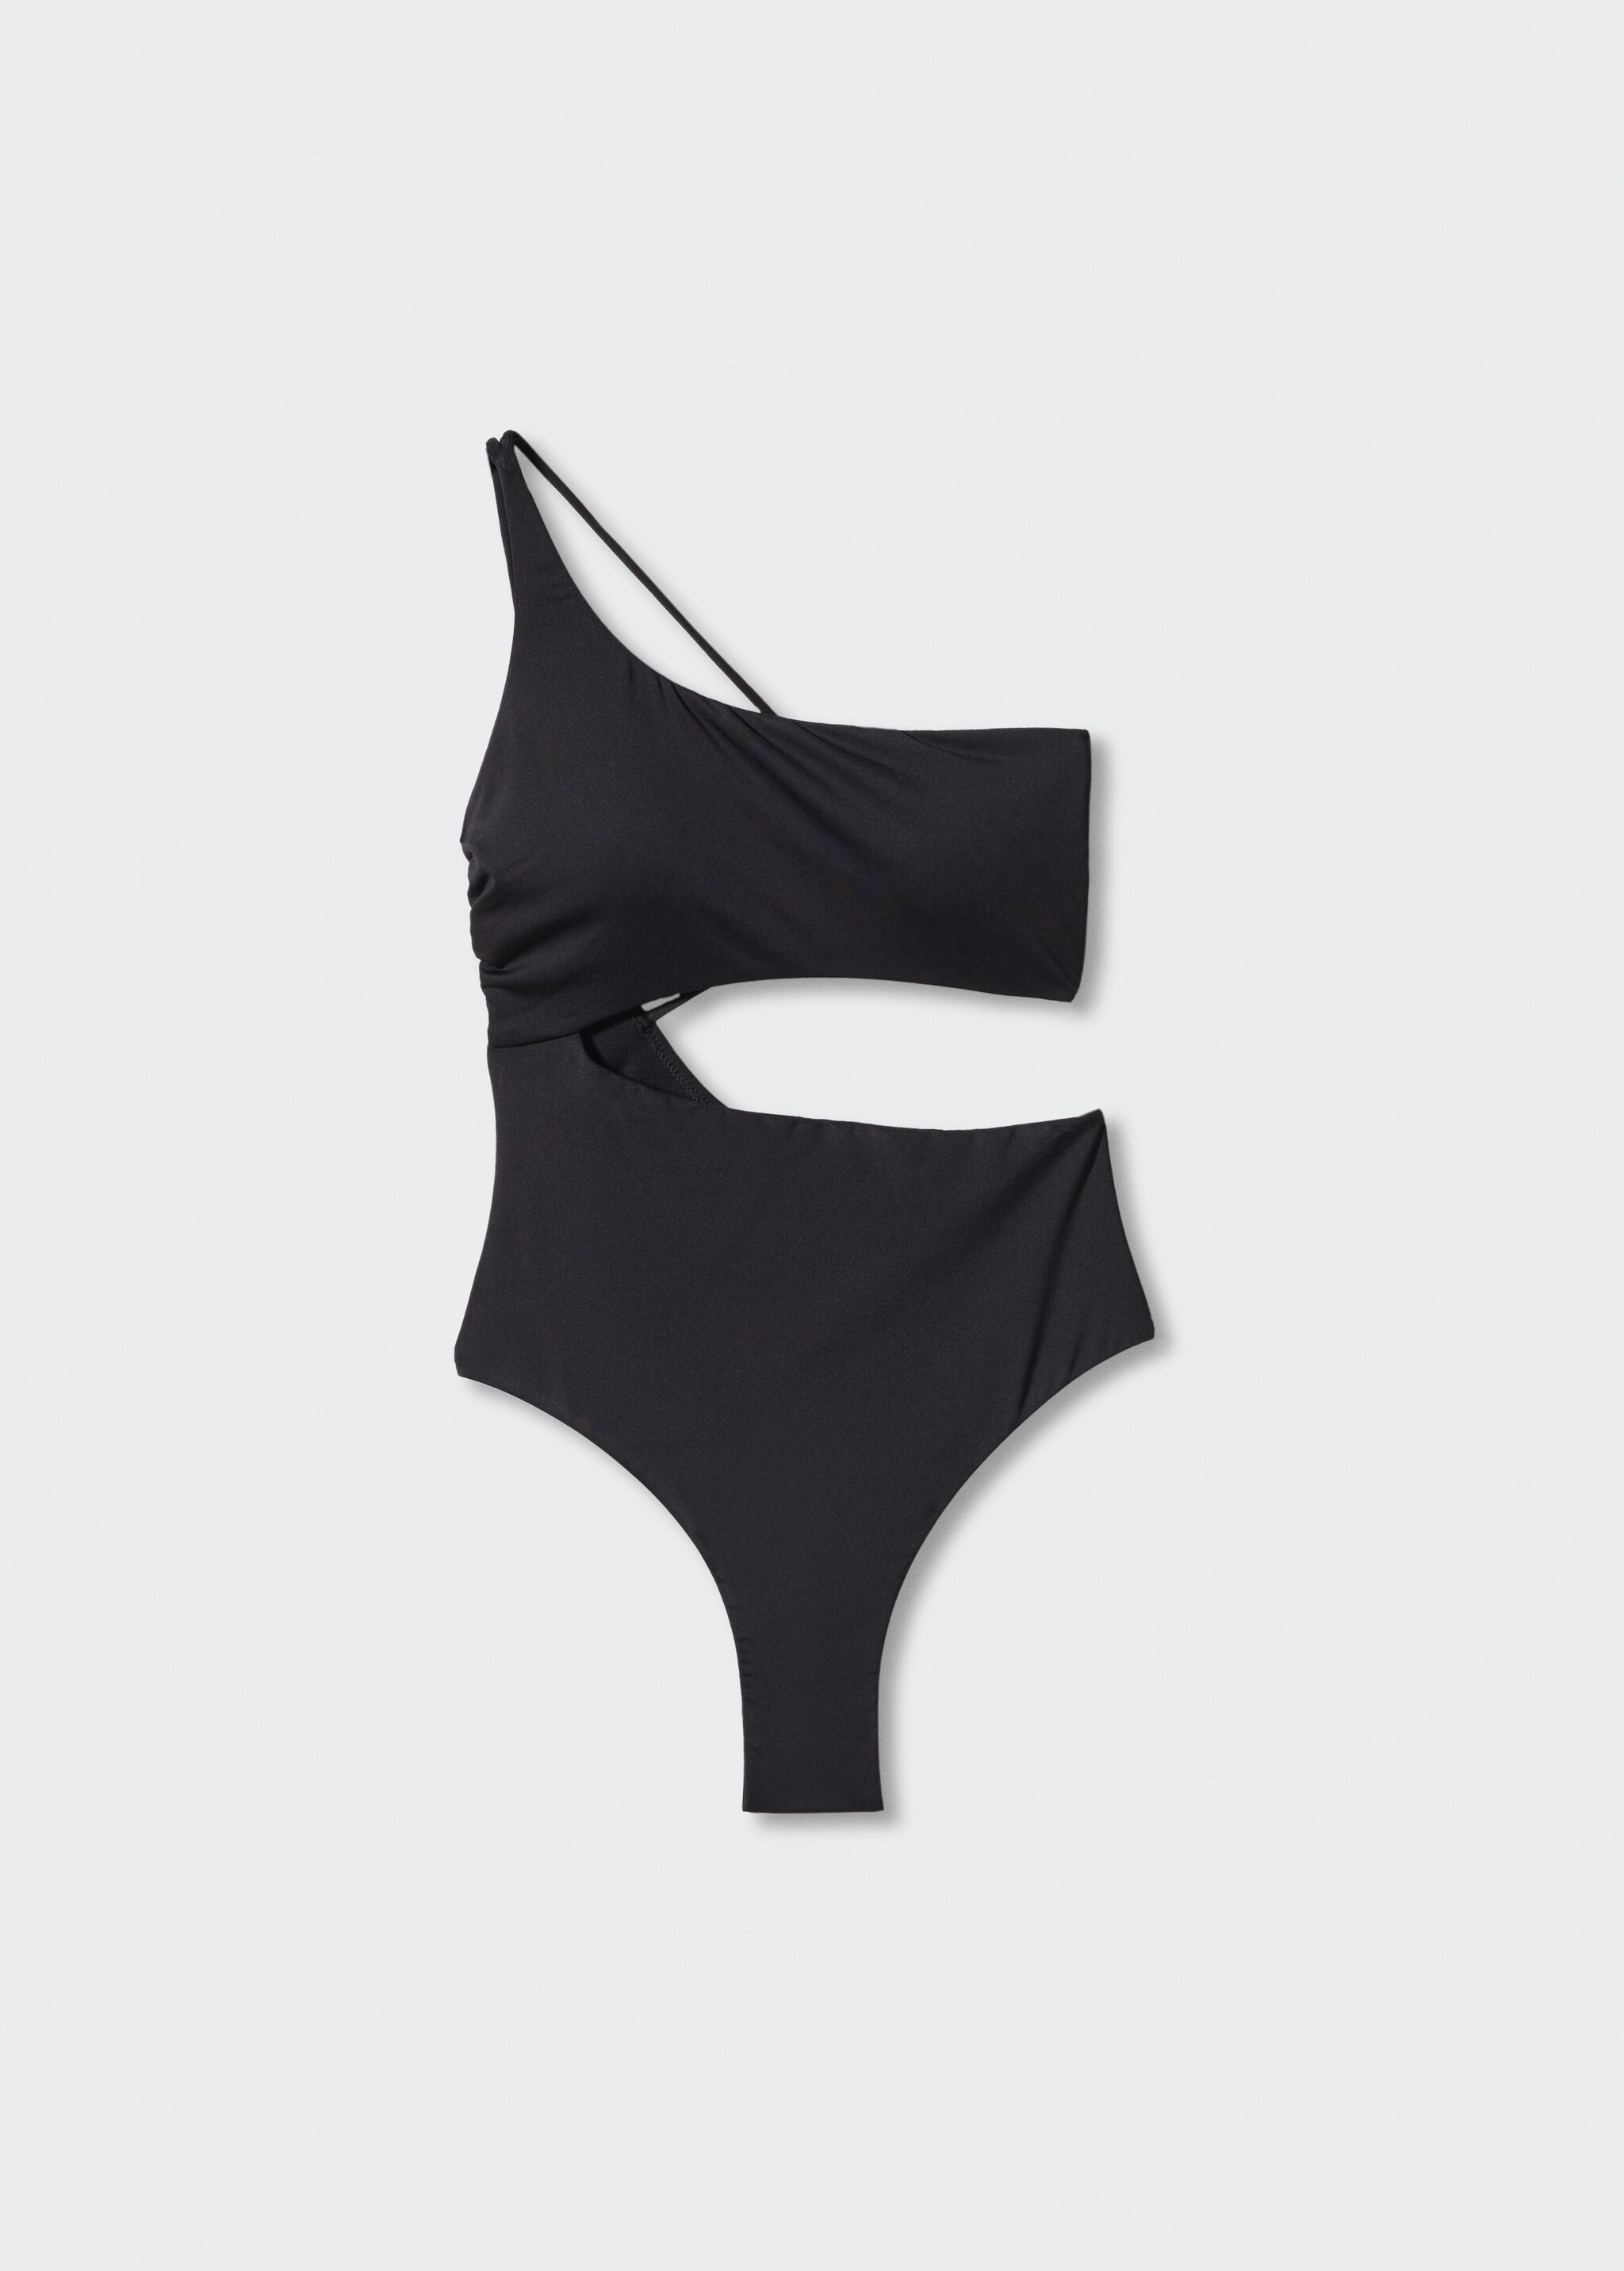 Swimsuit with asymmetrical opening - Article without model